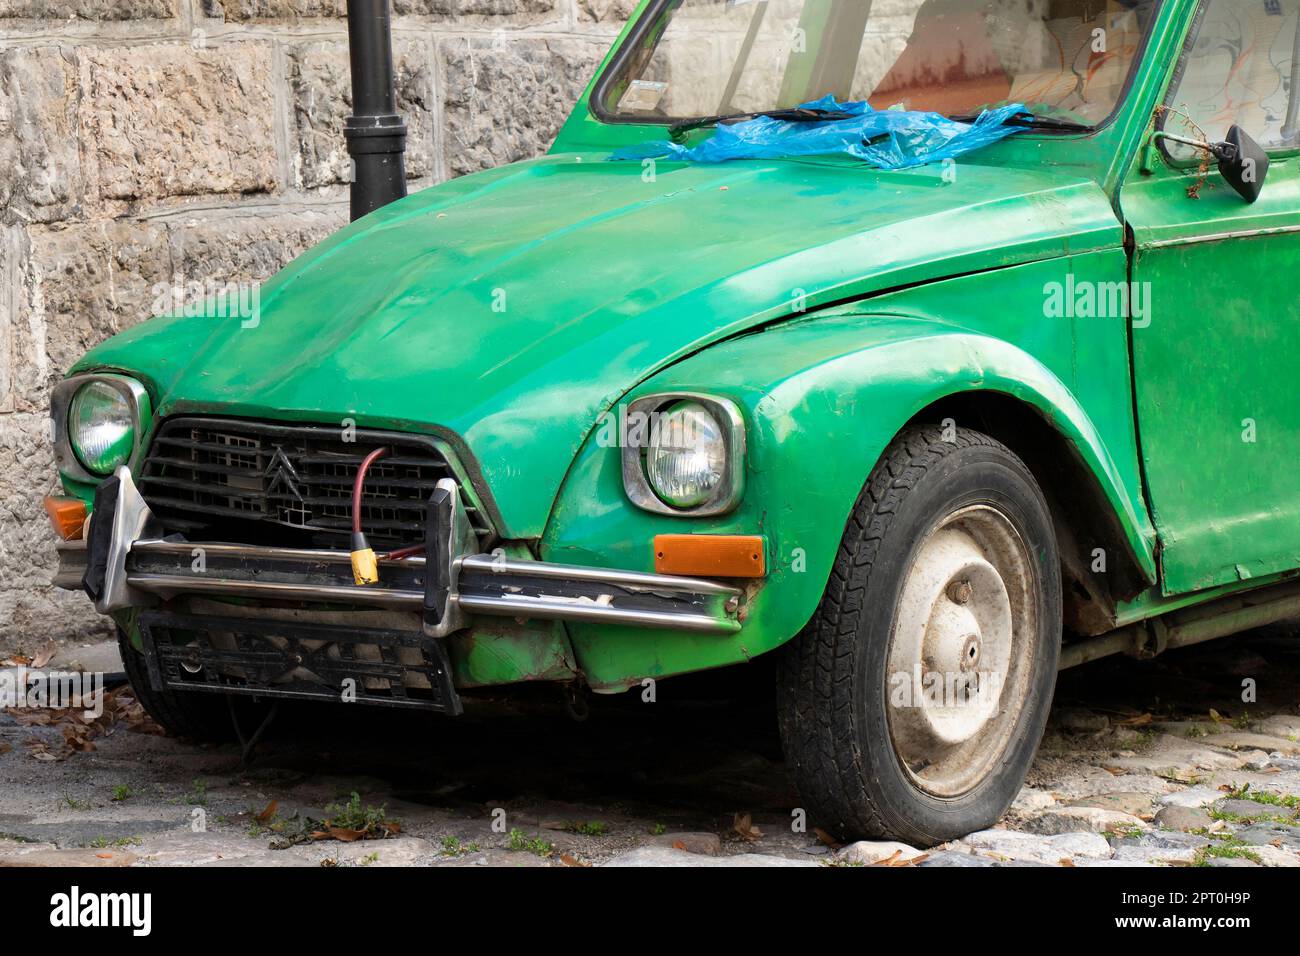 Belgrade, Serbia - February 23, 2023: Plate less weathered and damaged green old timer parked in the old cobble stone street. Stock Photo